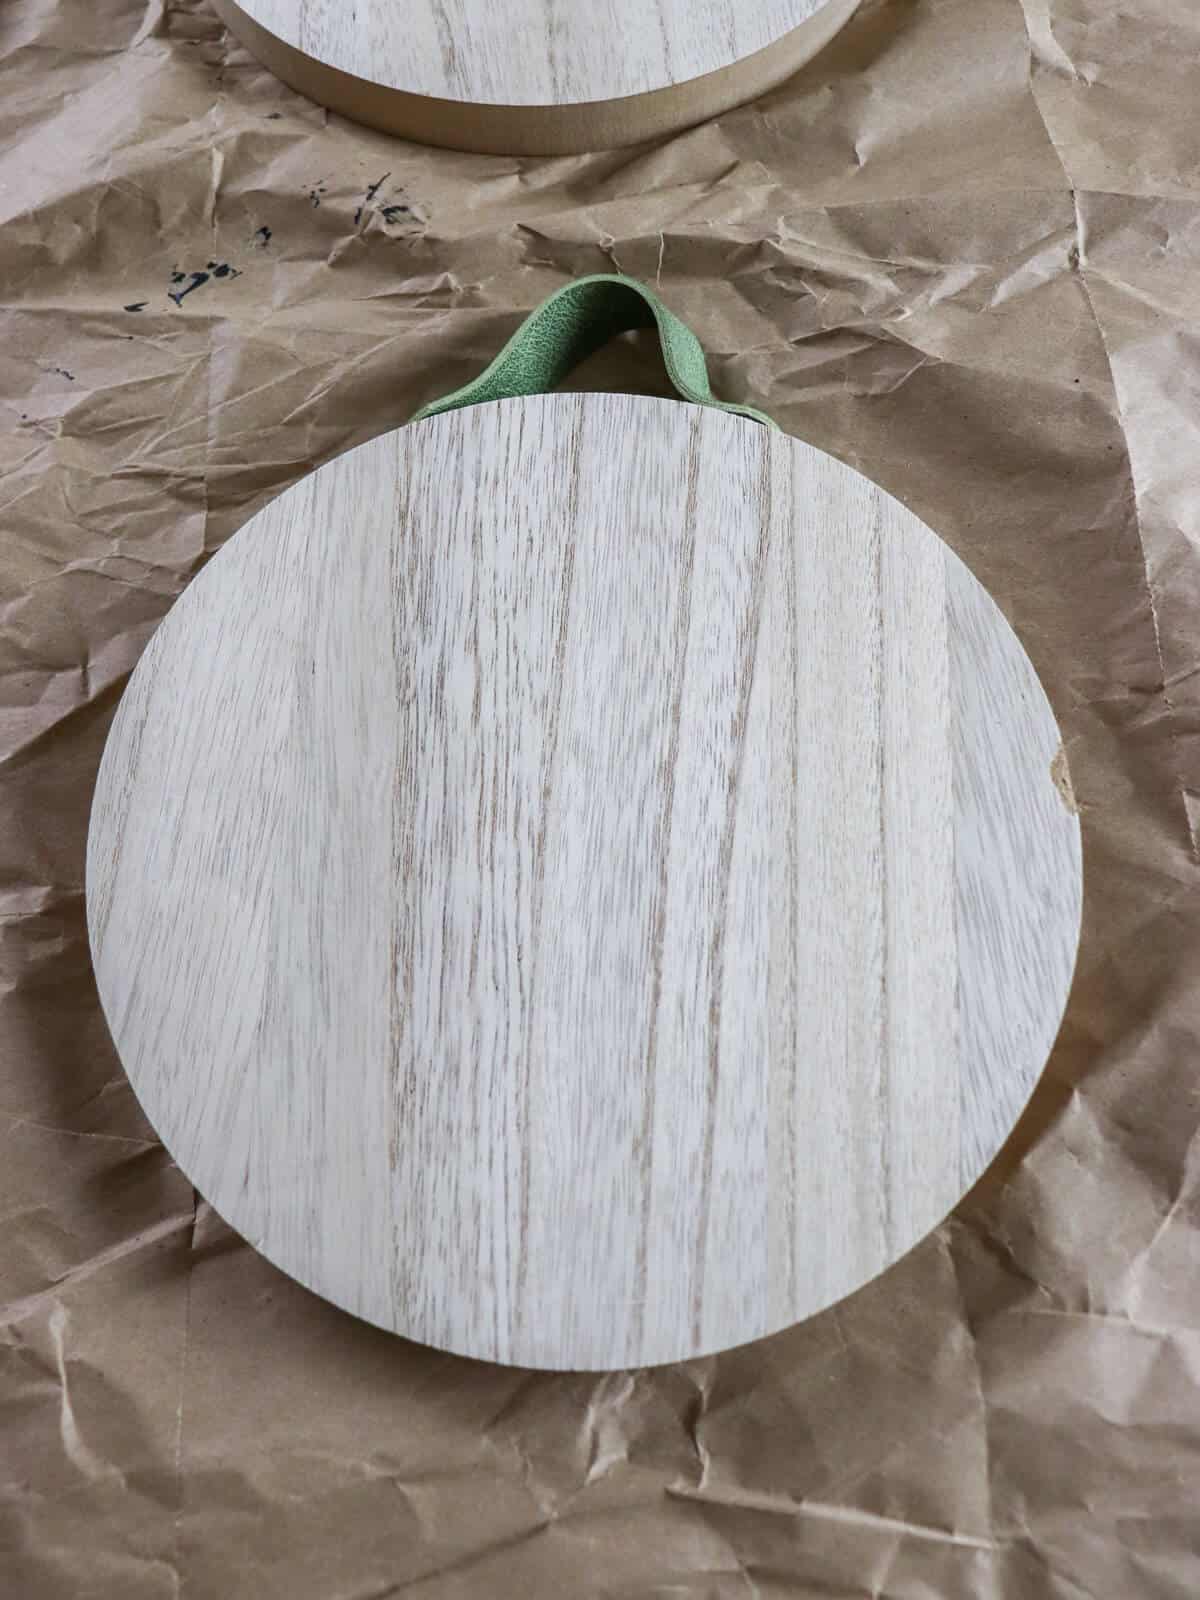 craft disc with wood grain